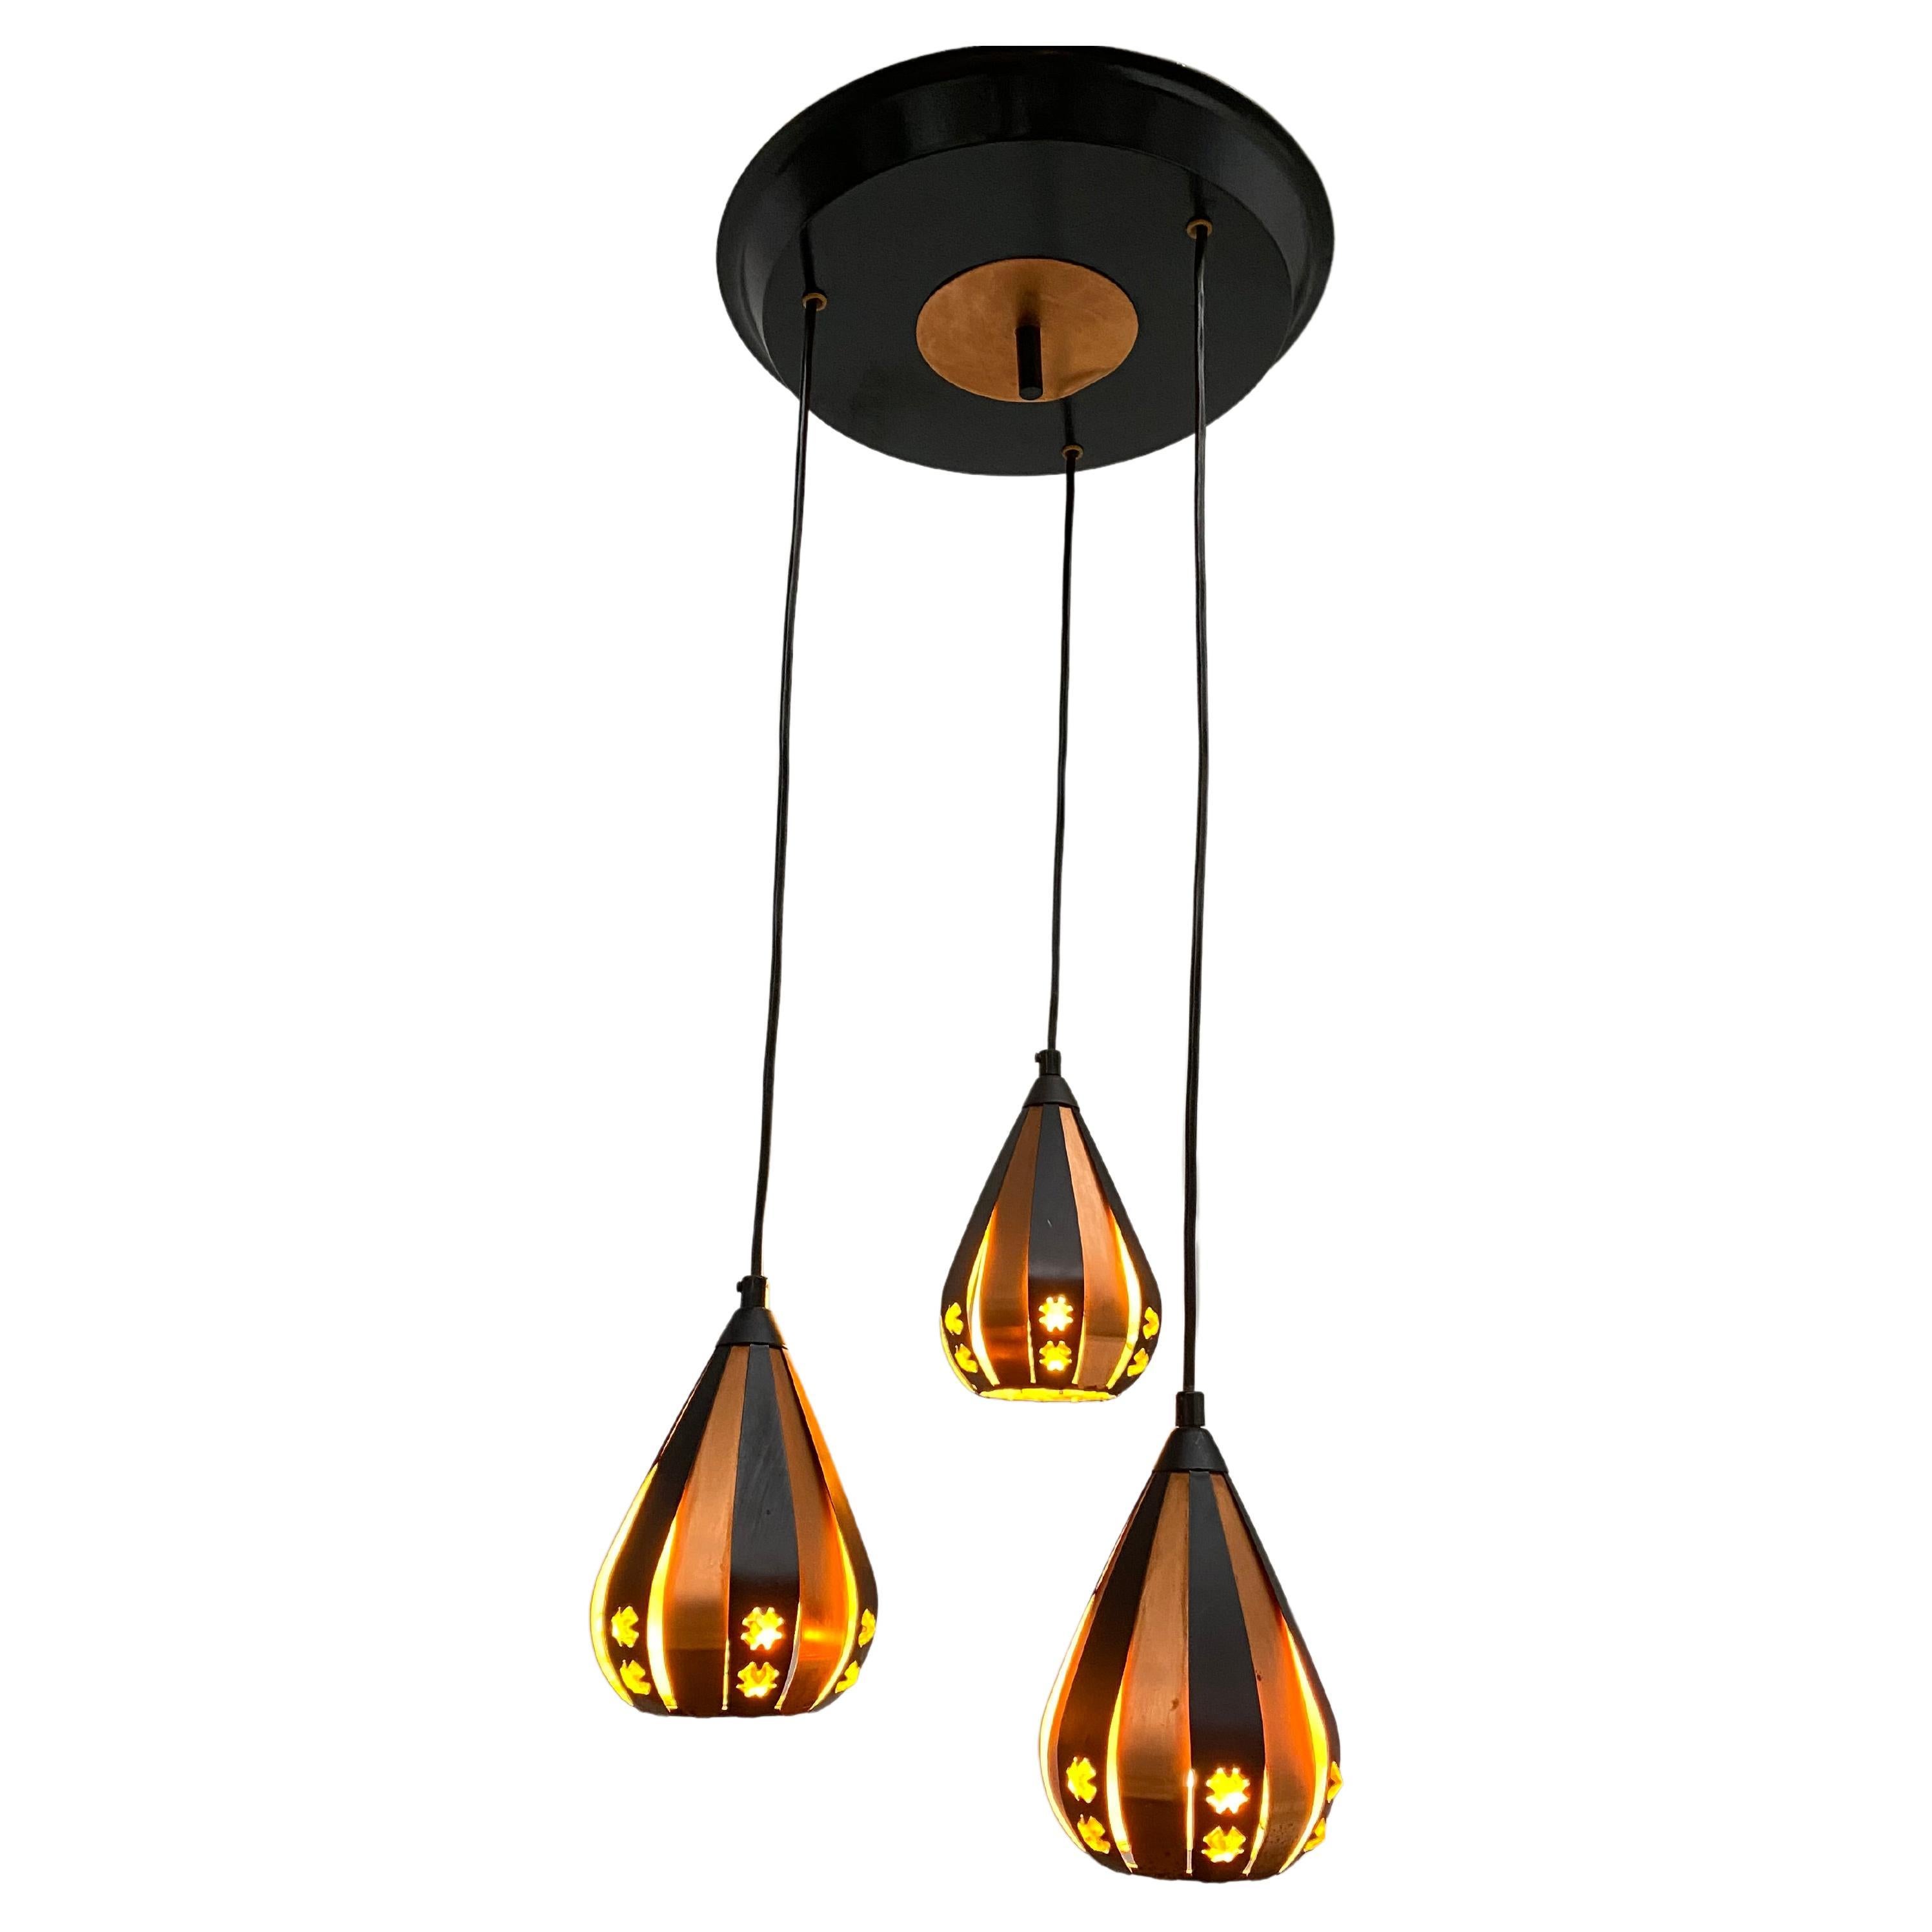 3 Droplet Pendant Chandelier by Werner Schou for Coronell Electrical Denmark 